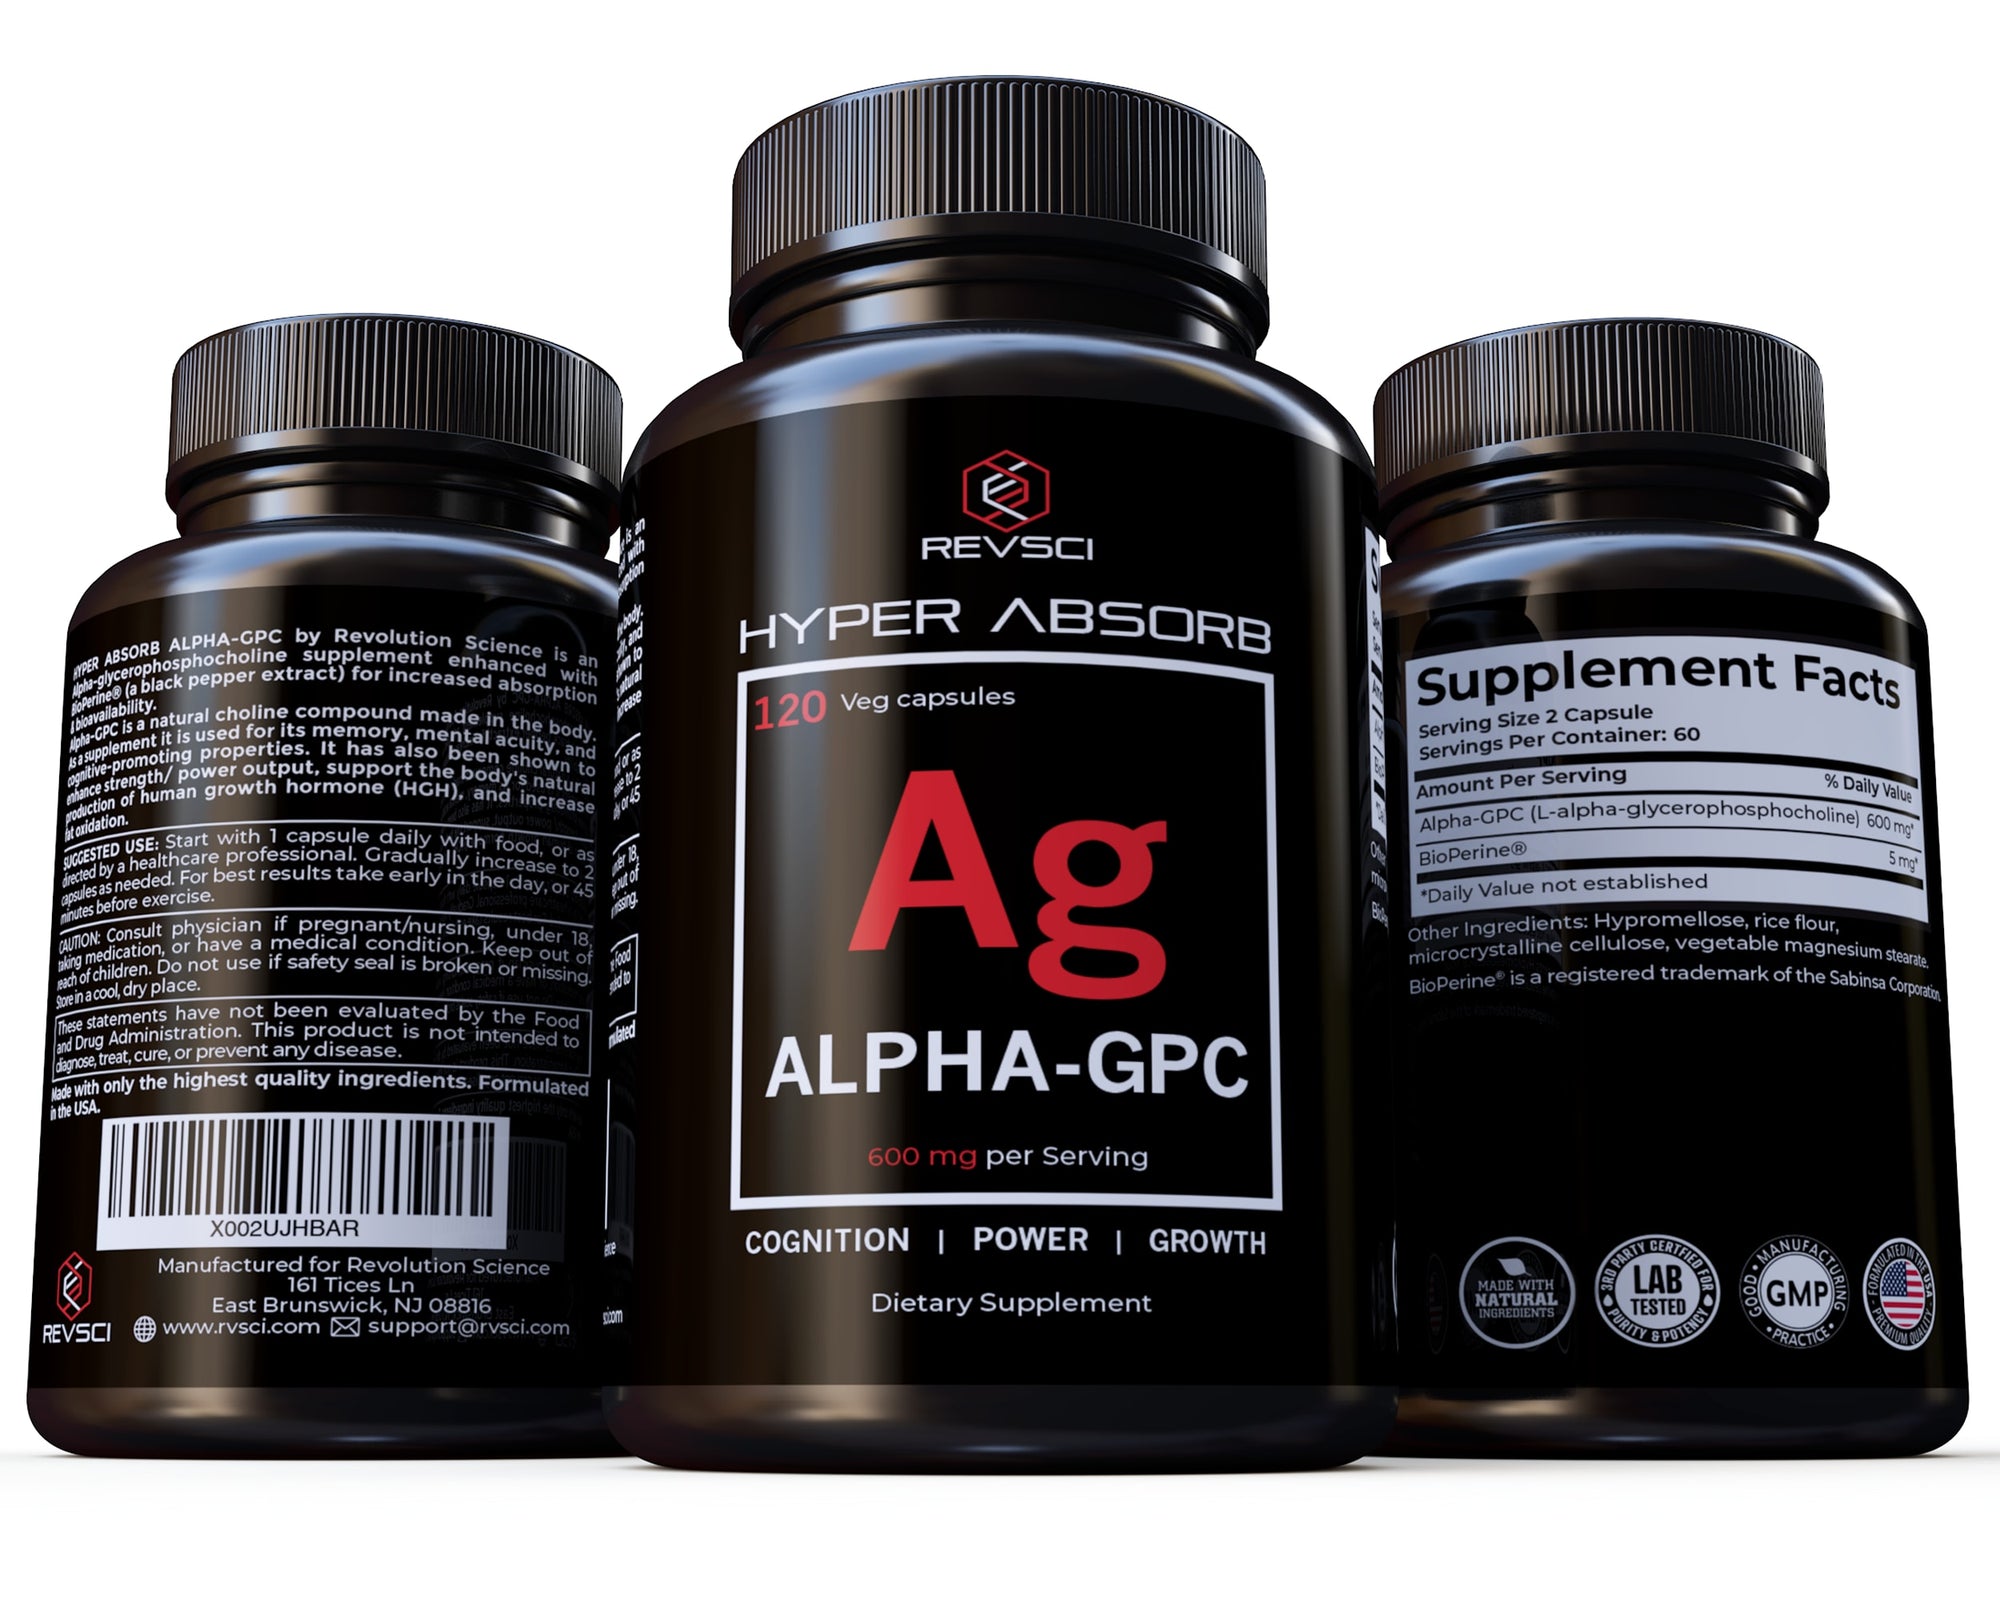 Hyper Absorb Alpha GPC, Brain Nootropic & Choline Supplement by